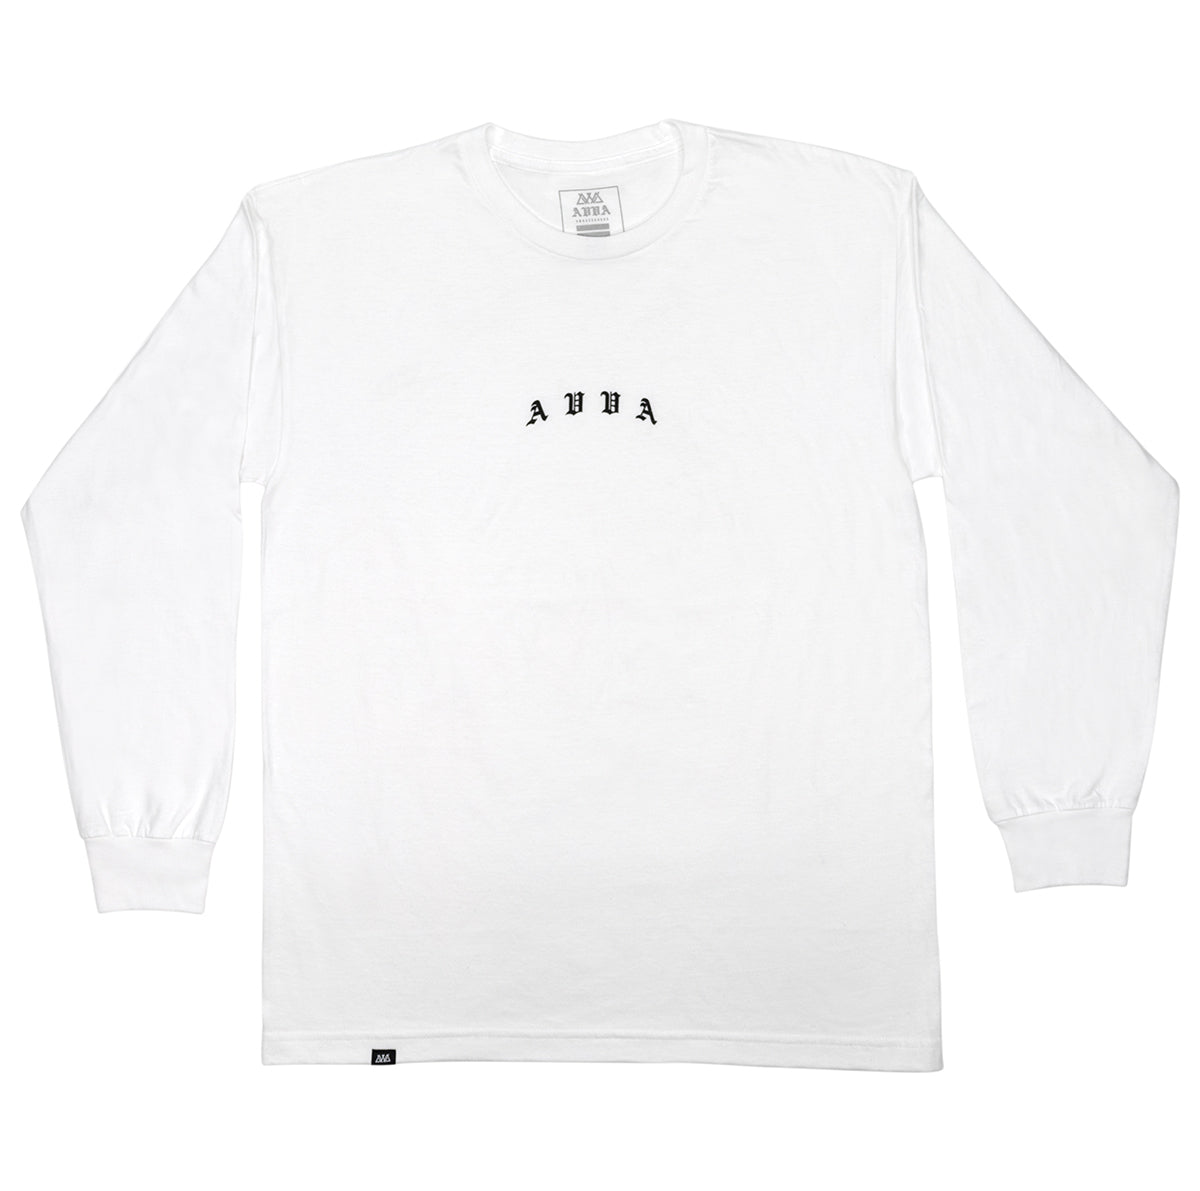 White long sleeve tee with black avva logo in the middle.